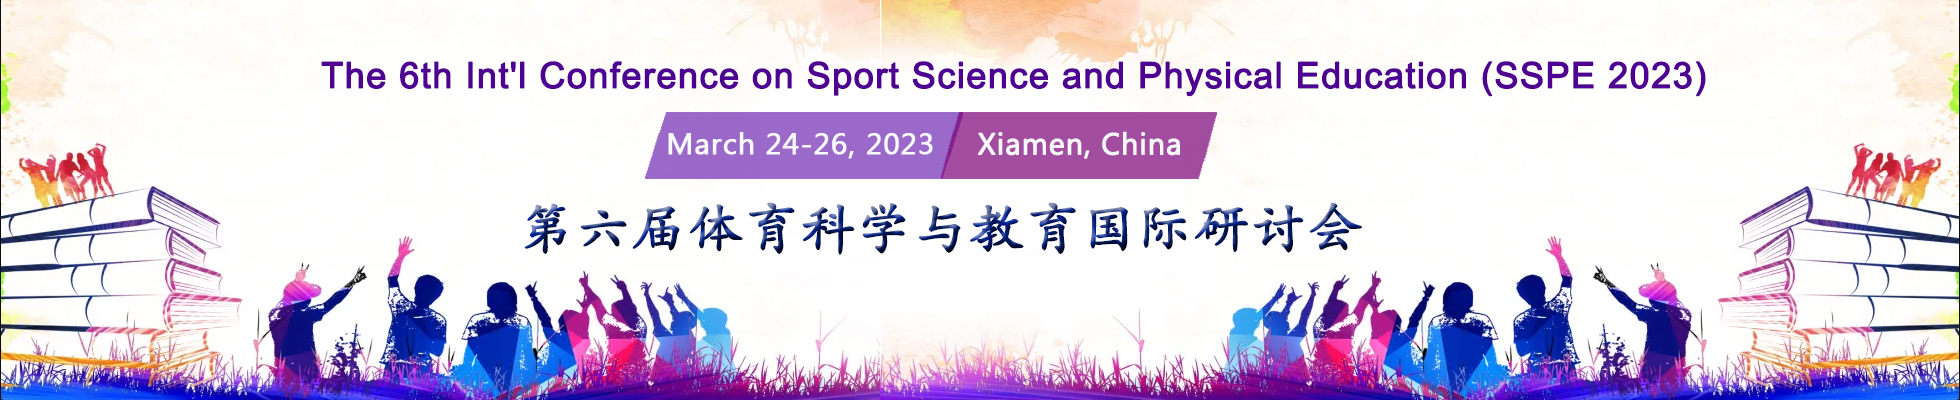 The 6th Int'l Conference on Sport Science and Physical Education (SSPE 2023)